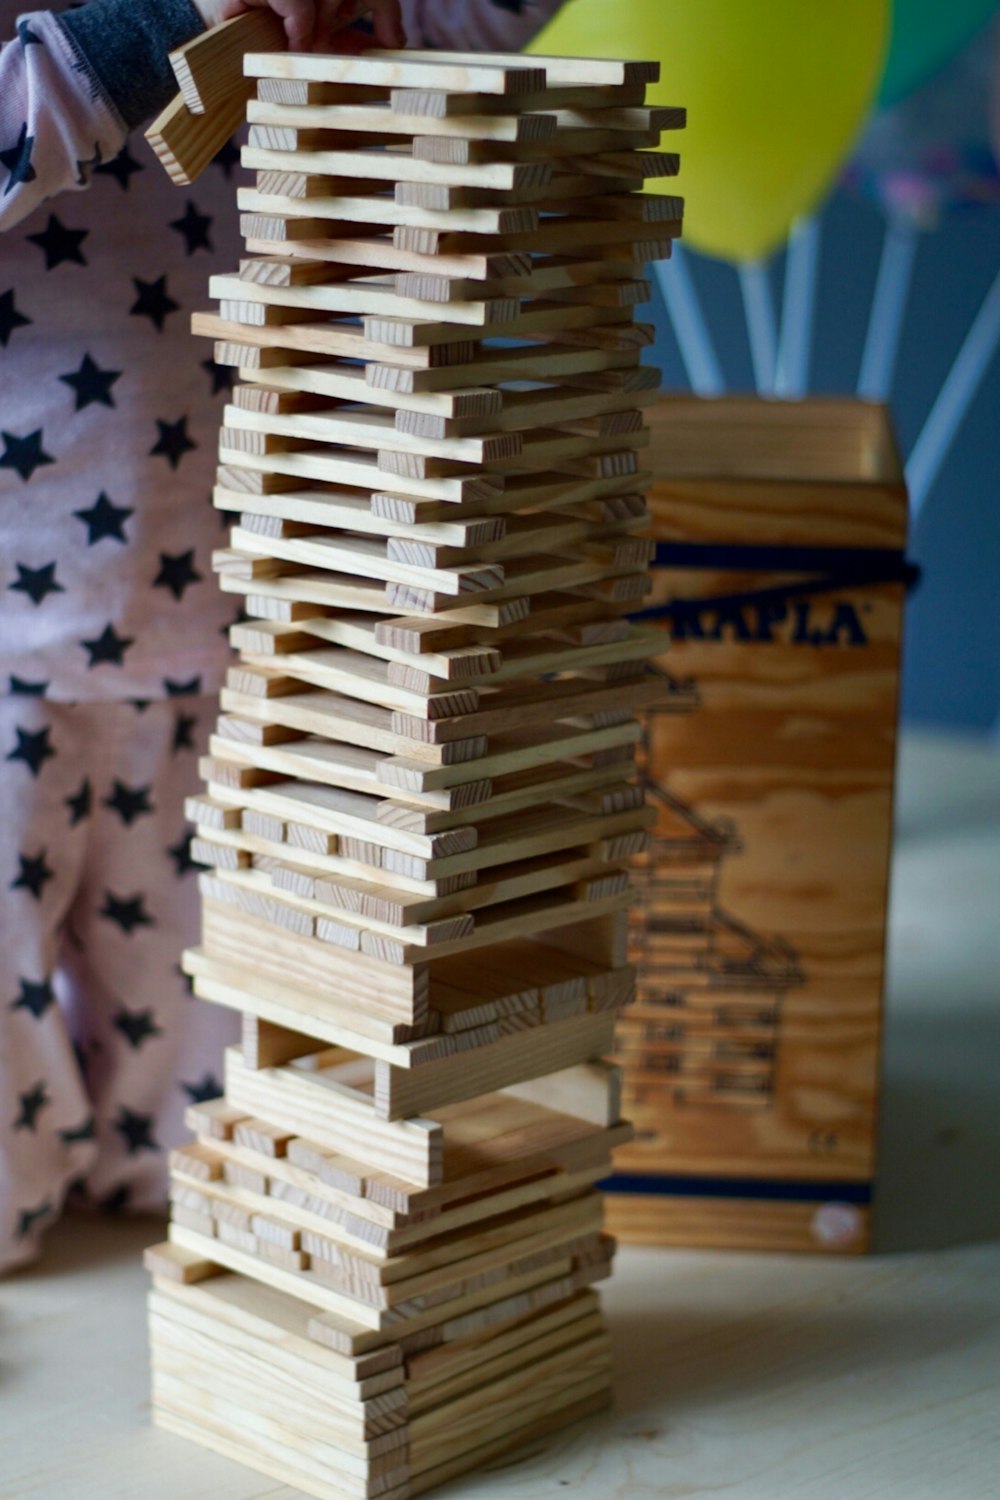 a person is building a tower of wooden blocks